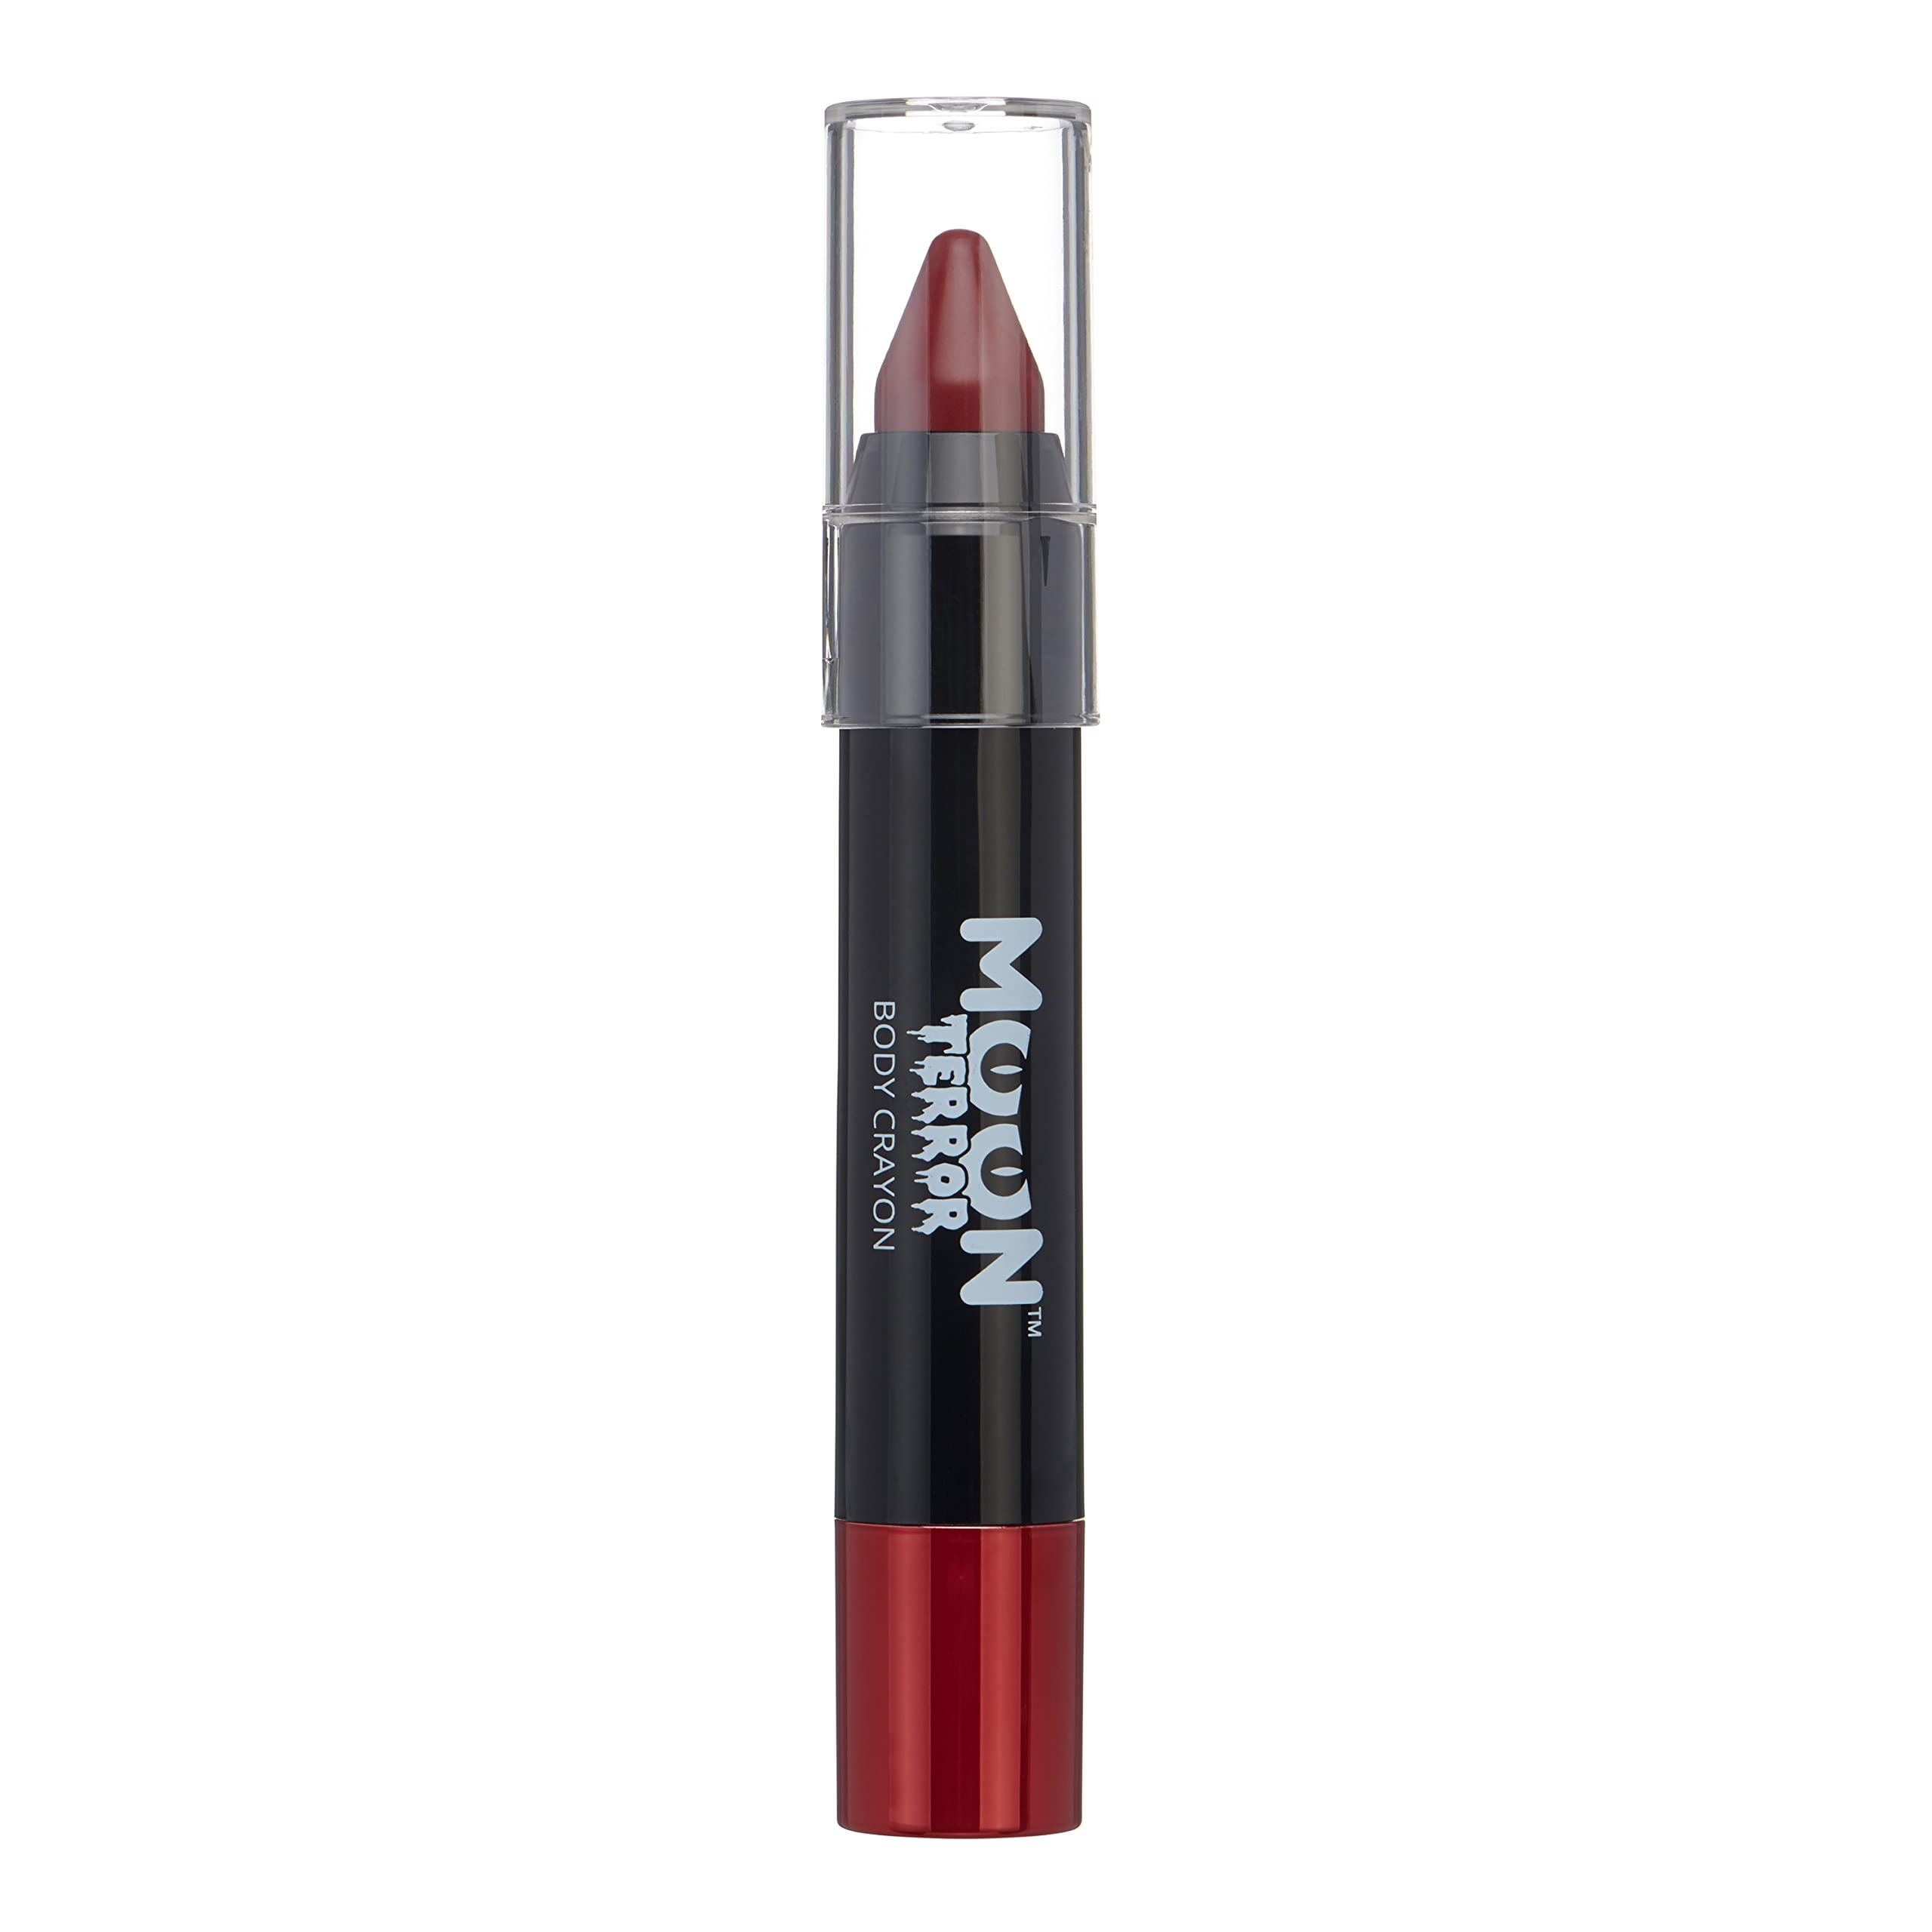 Halloween Face Paint Stick Body Crayon by Moon Terror, SFX Make up - Blood Red - Special Effects Make up - 0.12oz